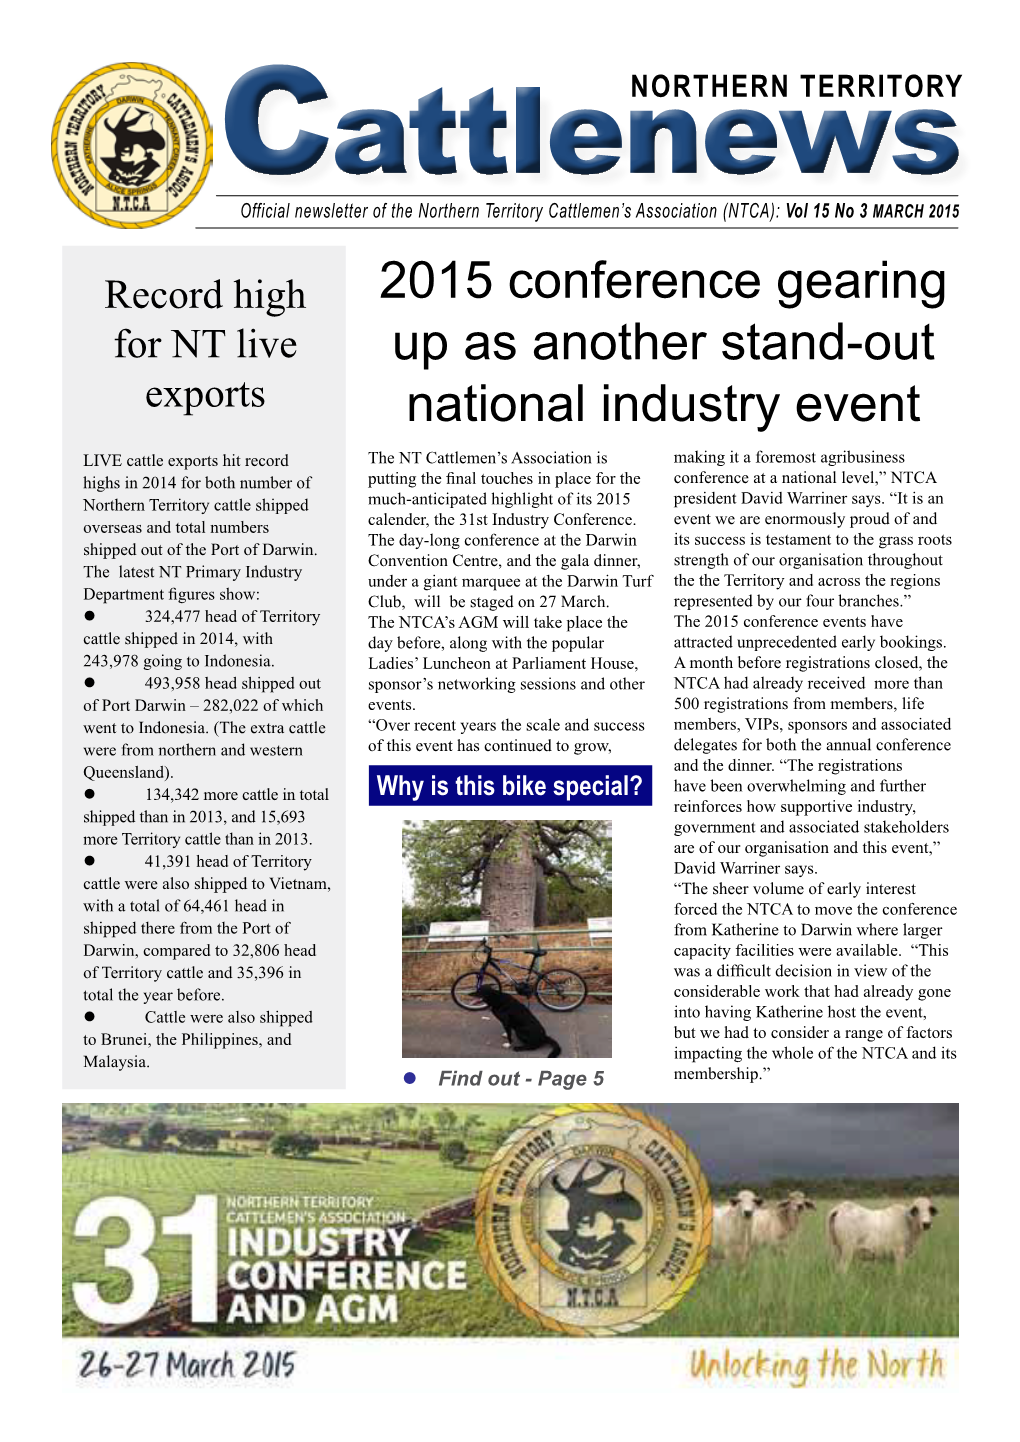 2015 Conference Gearing up As Another Stand-Out National Industry